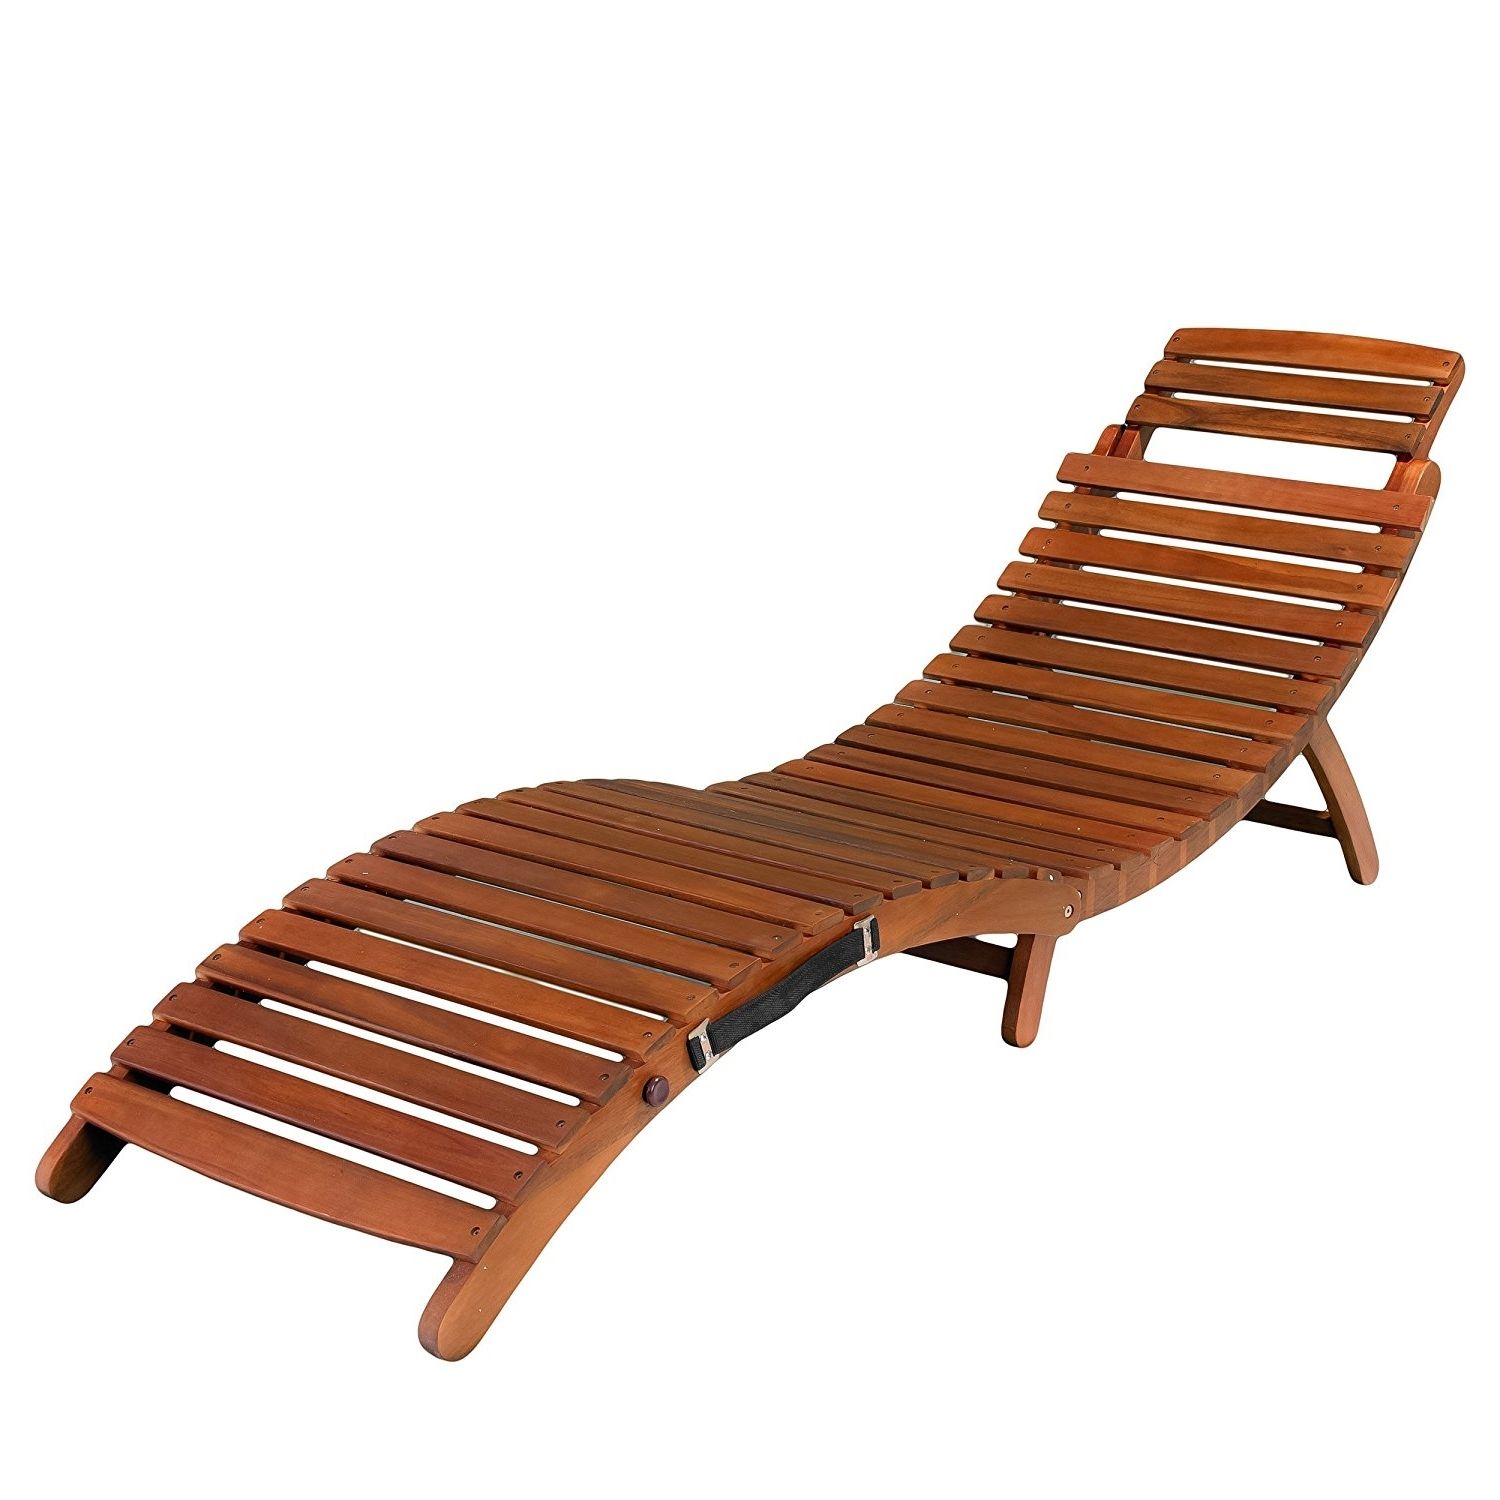 Most Recently Released Amazon: Best Selling Del Rio Wood Outdoor Chaise Lounge Pertaining To Wooden Outdoor Chaise Lounge Chairs (View 7 of 15)